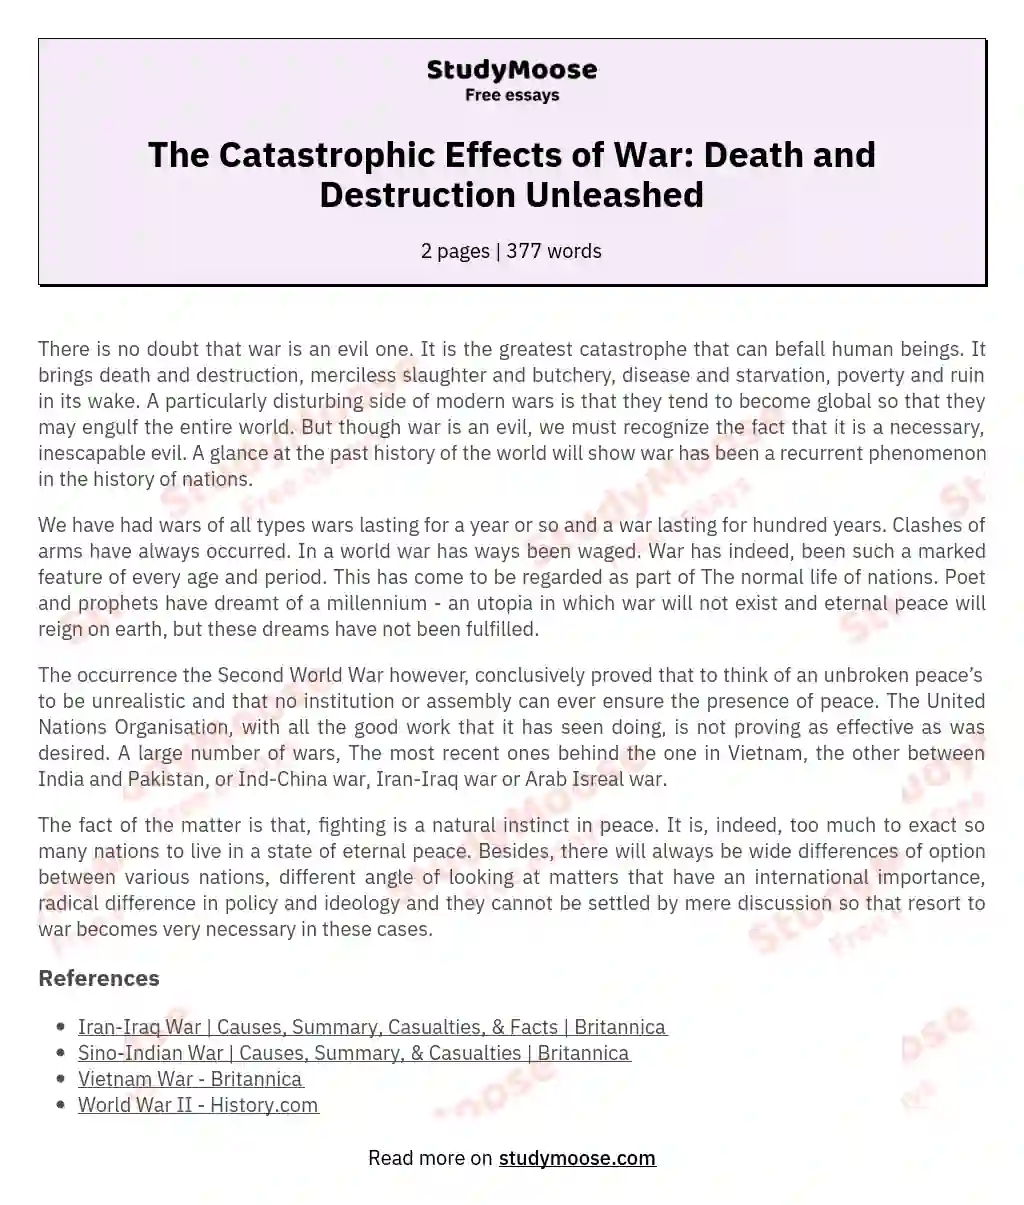 The Catastrophic Effects of War: Death and Destruction Unleashed essay